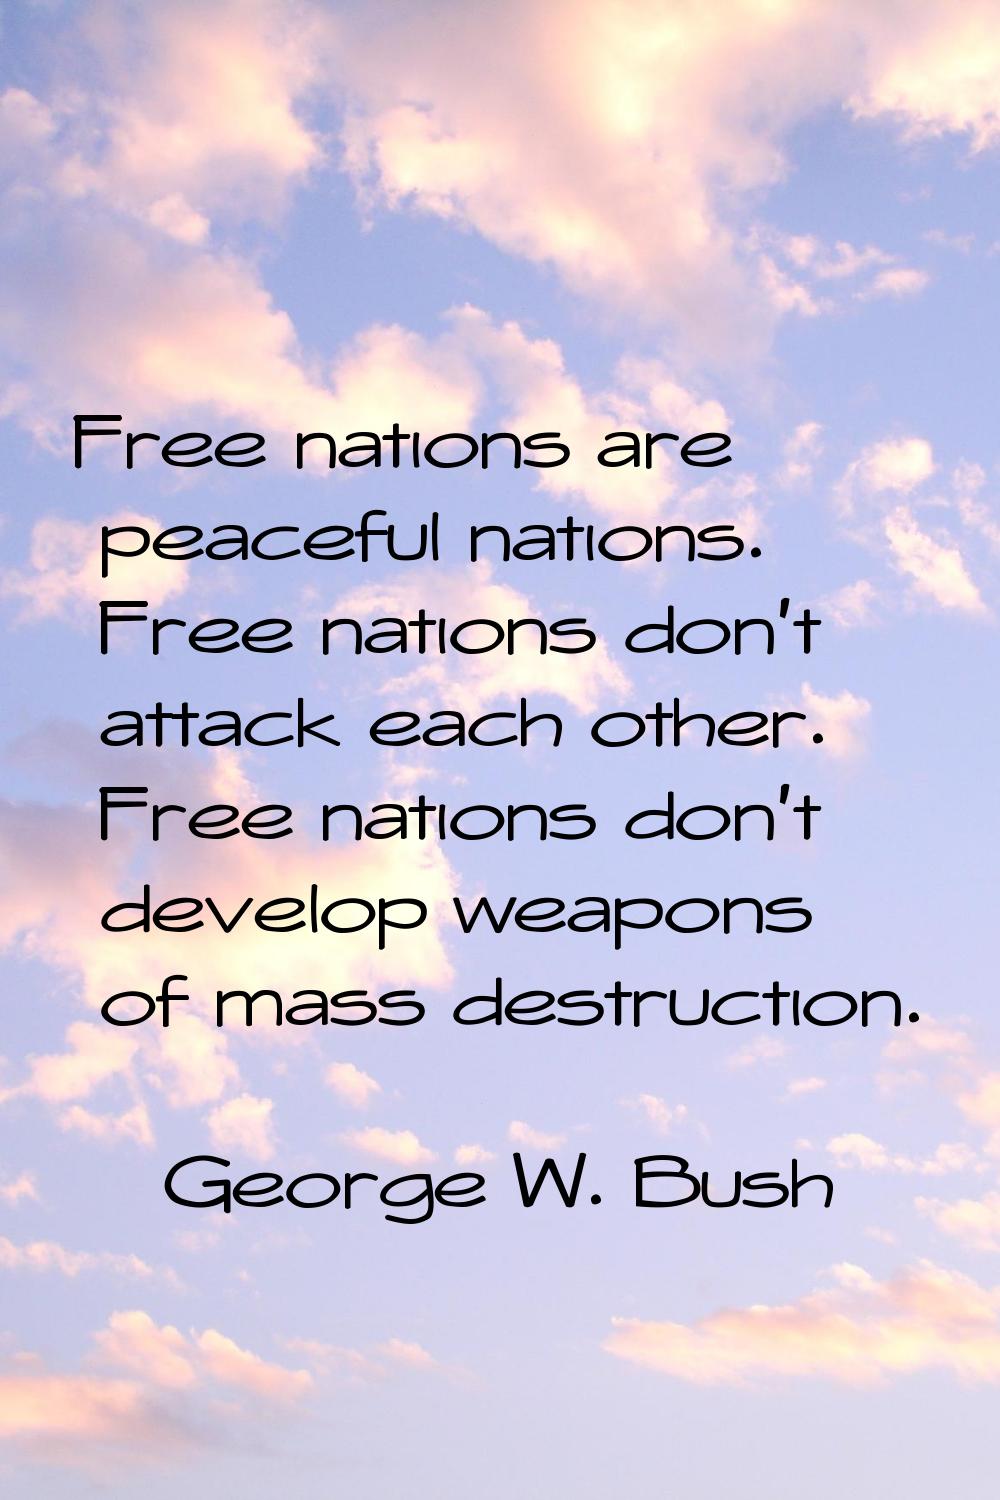 Free nations are peaceful nations. Free nations don't attack each other. Free nations don't develop